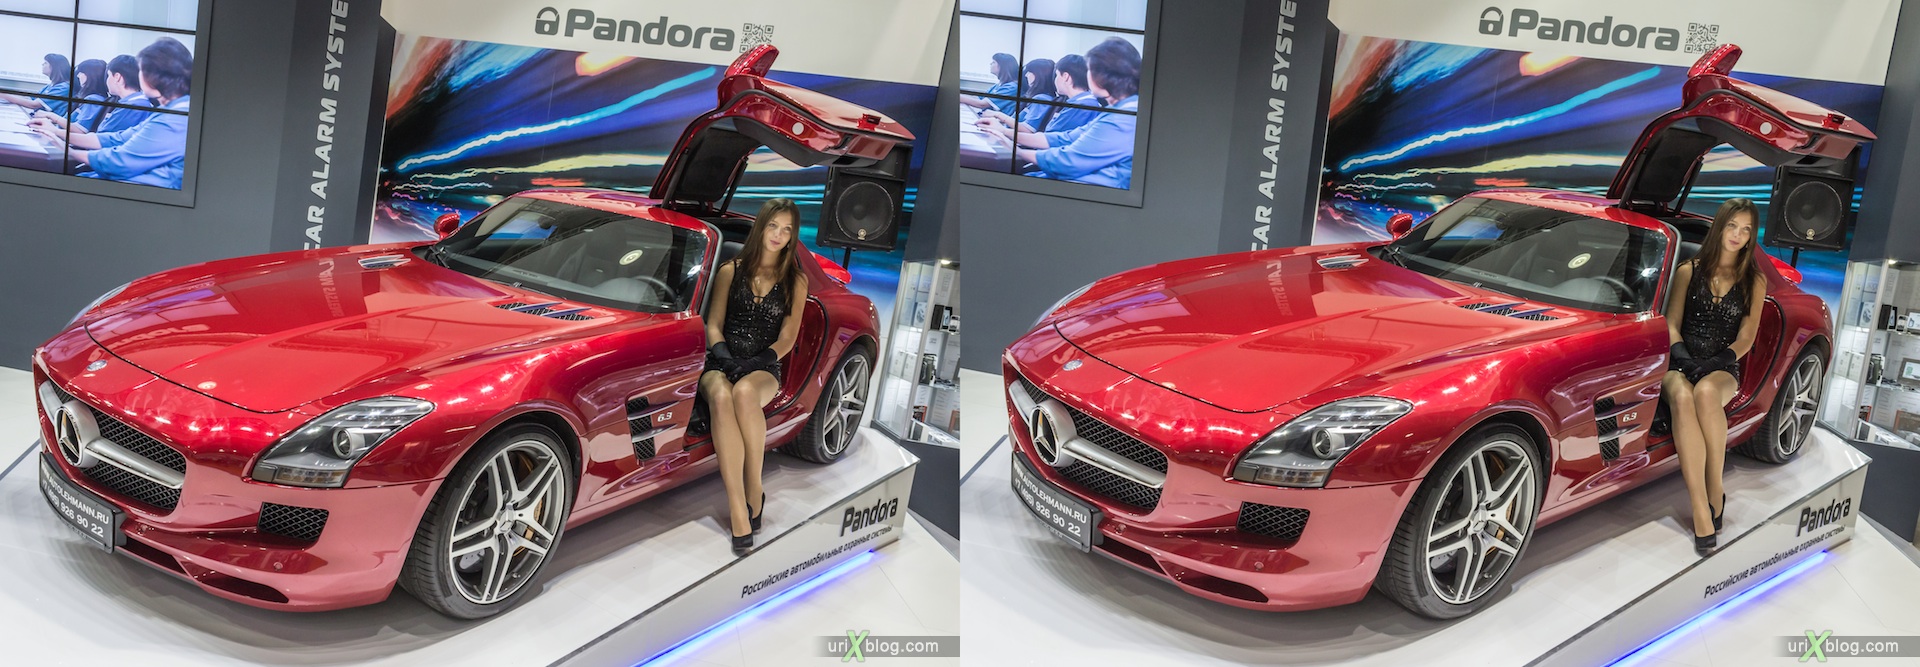 2012, Mercedes Benz, girl, model, Moscow International Automobile Salon, auto show, 3D, stereo pair, cross-eyed, crossview